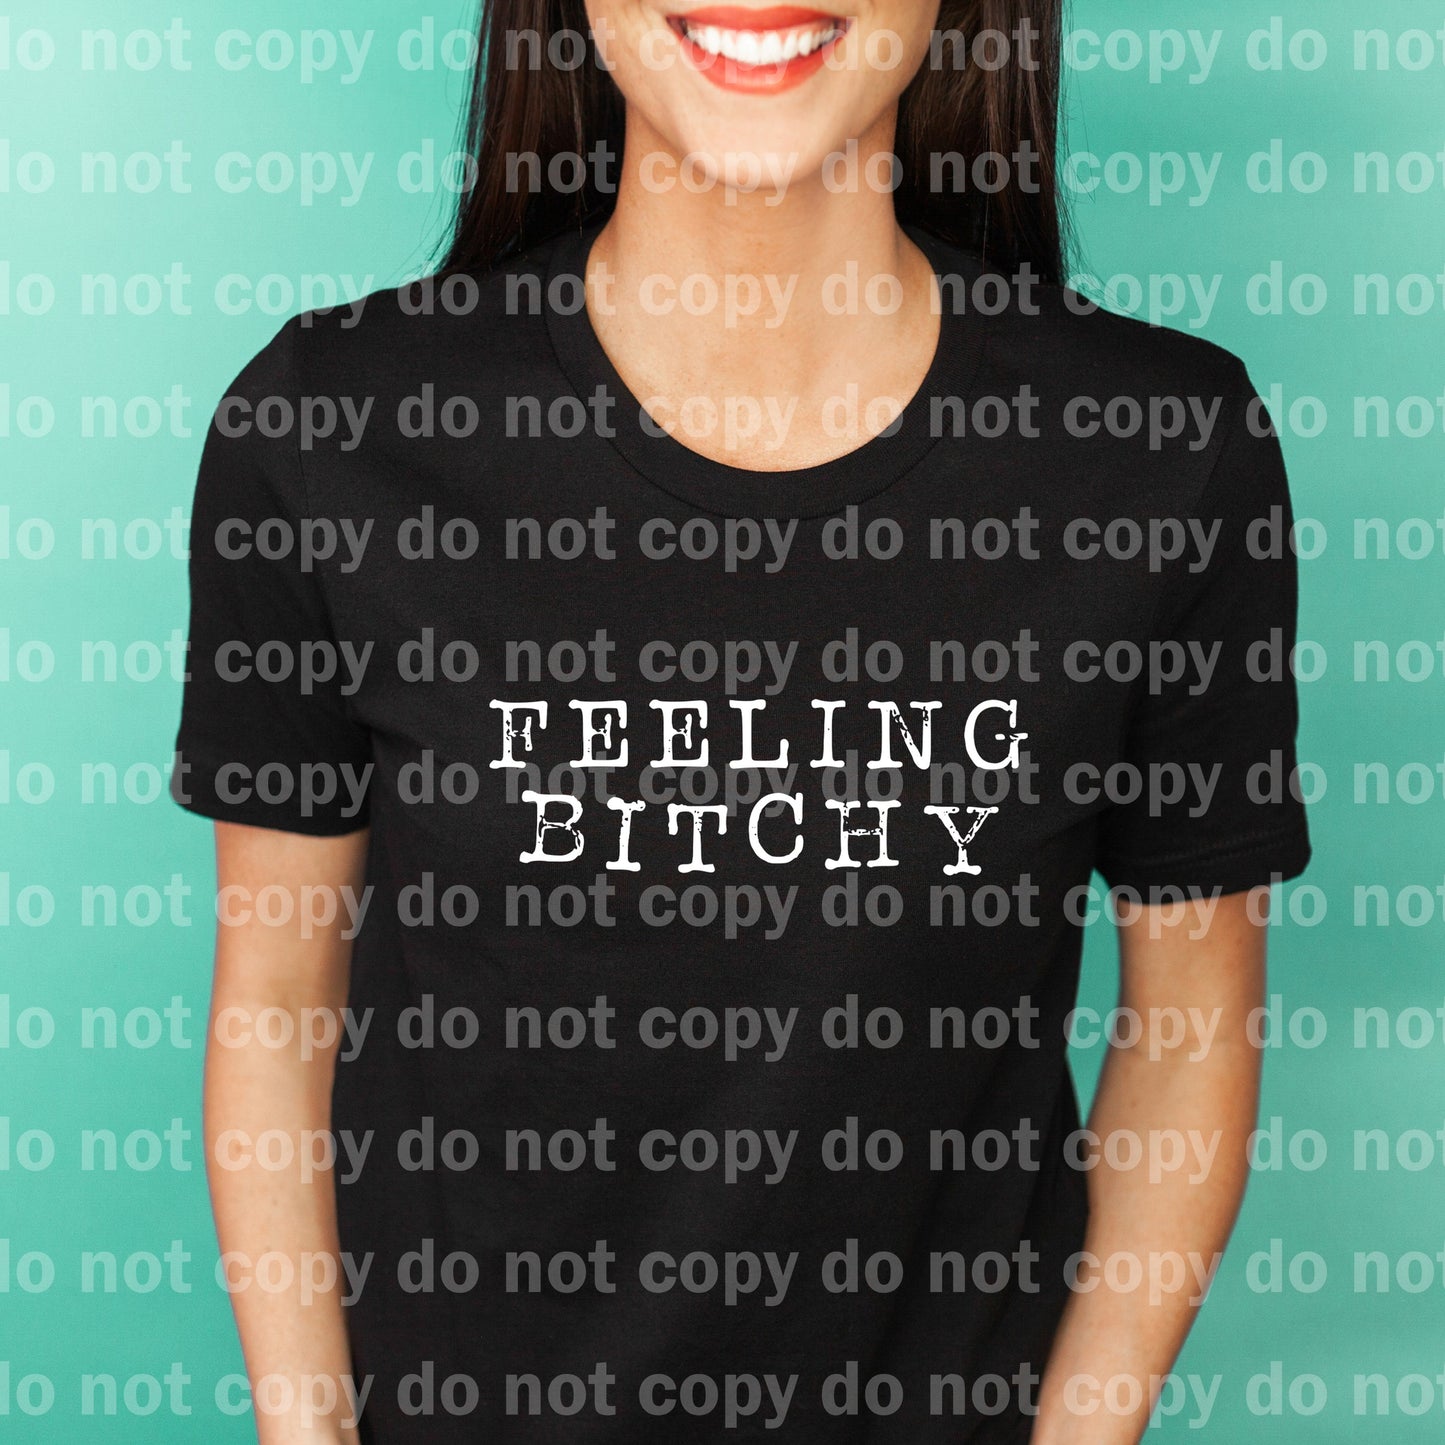 Feeling Bitchy Black/White Dream Print or Sublimation Print